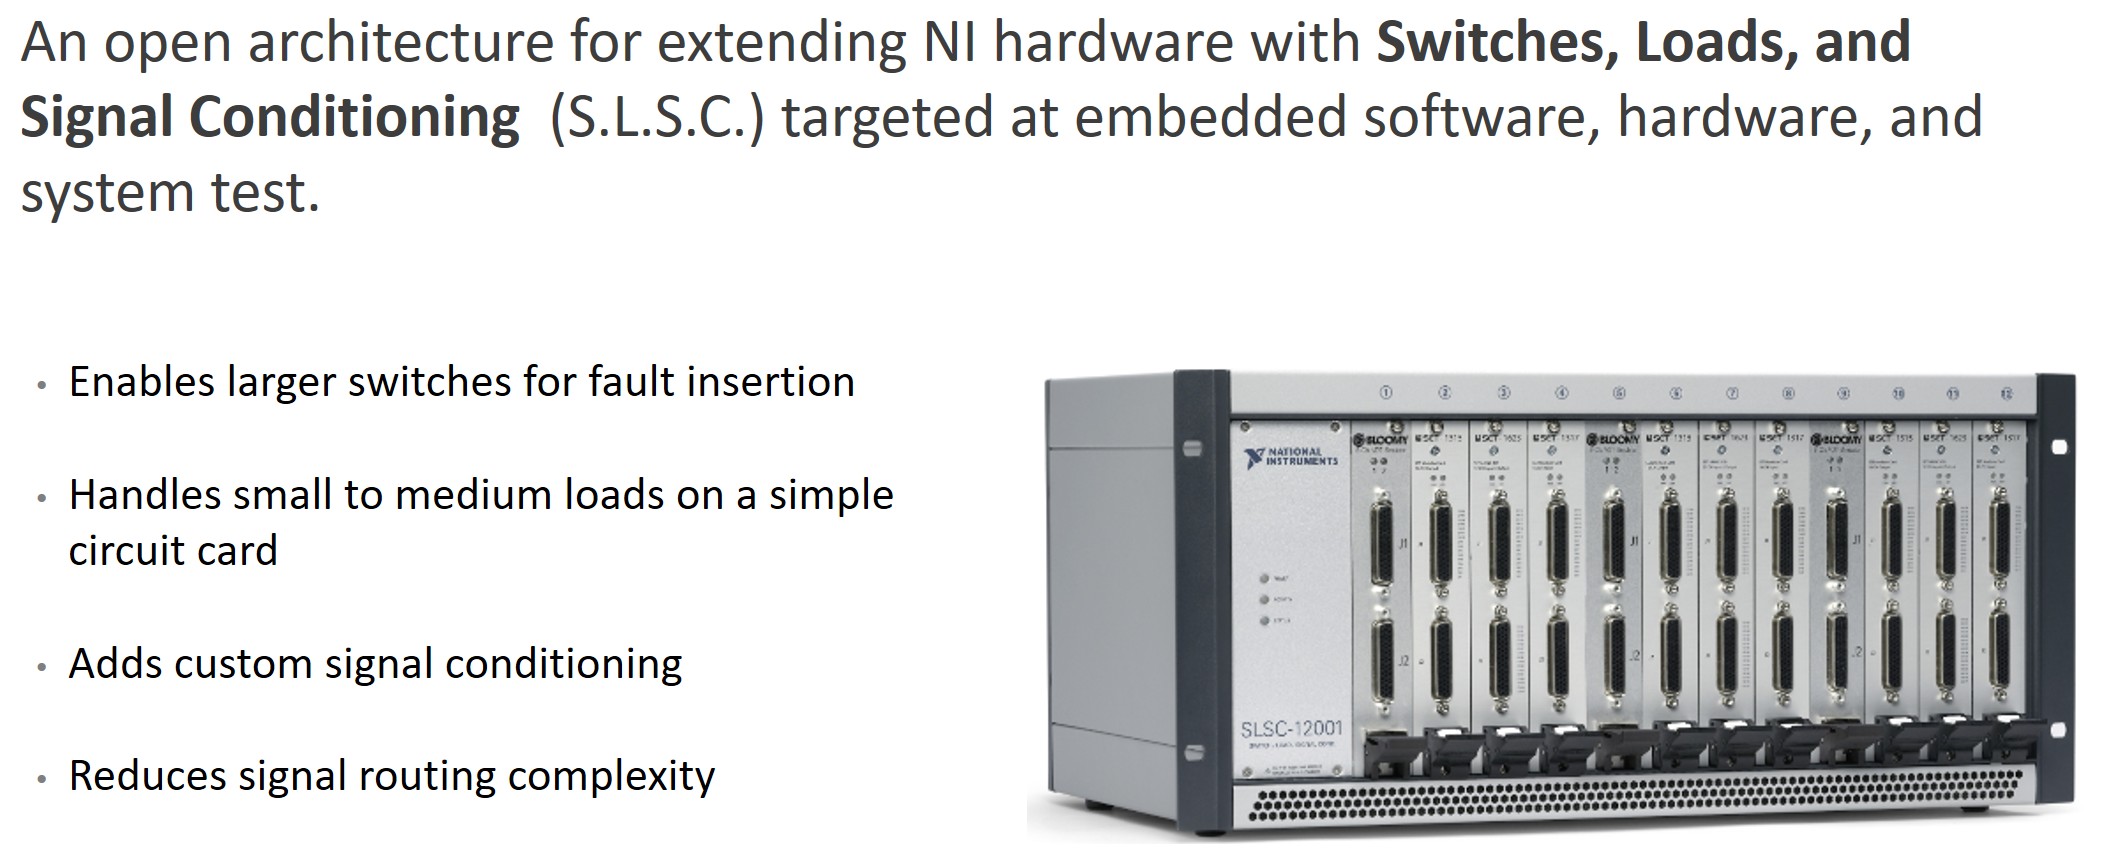 The NI Switch Load Signal Conditioning platform extends the PXI and CompactRIO instrumentation platforms to complete more of the LRU test system